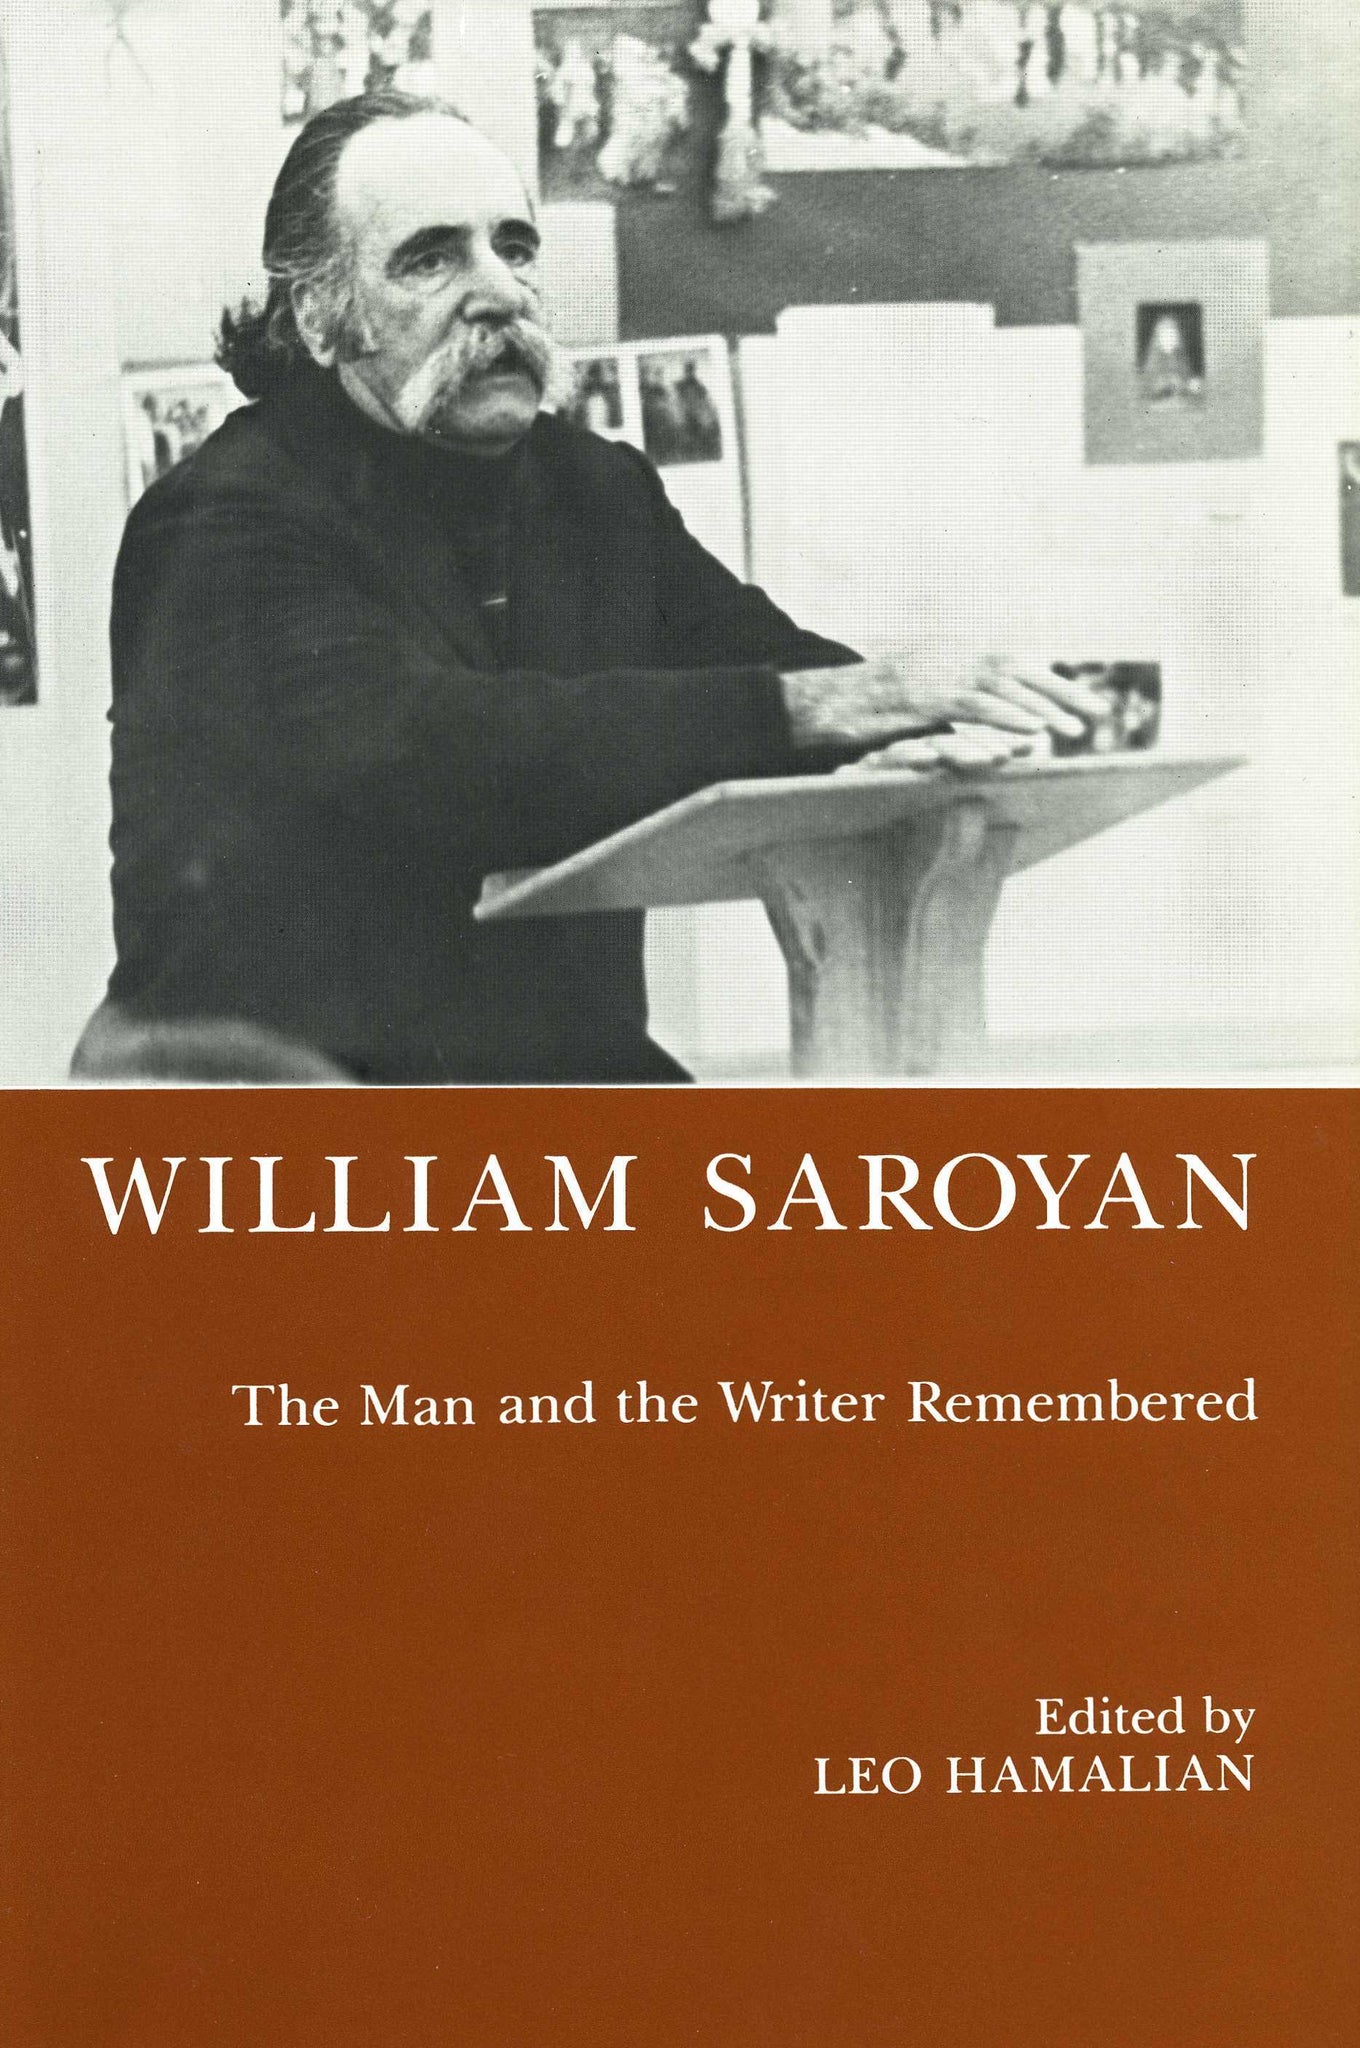 WILLIAM SAROYAN: The Man and the Writer Remembered